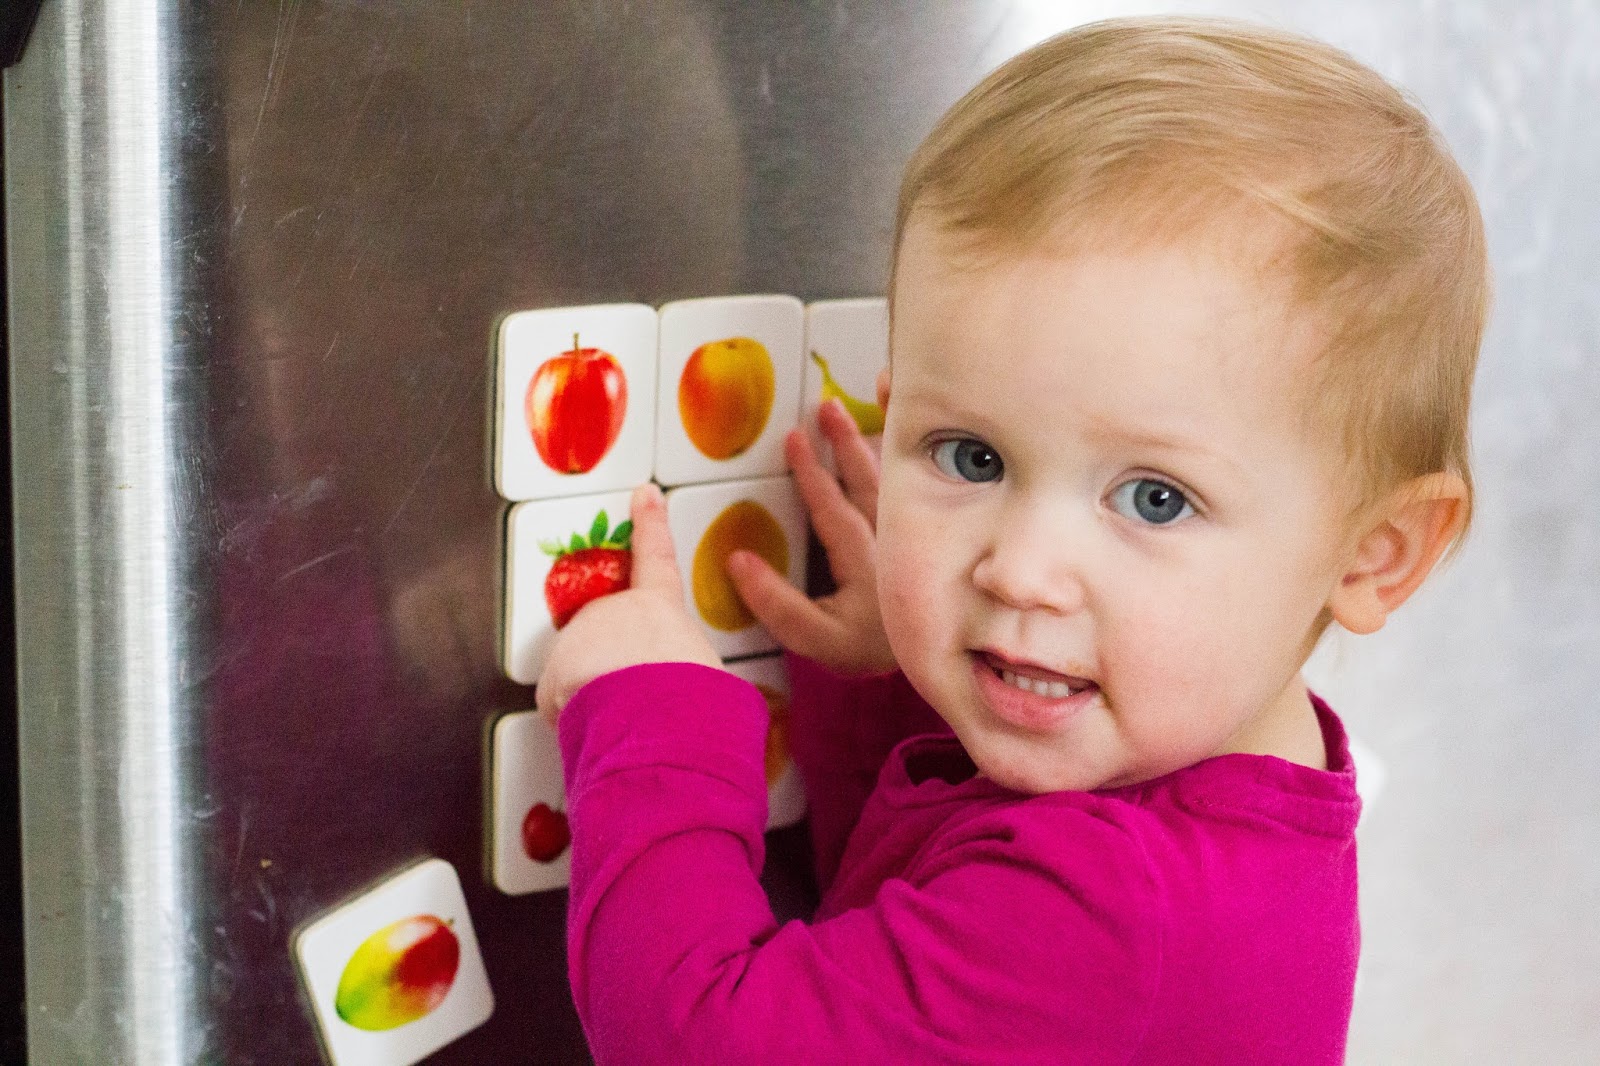 Young toddler stands in front of refrigerator pointing to various wooden magnets with pictures of fruit.